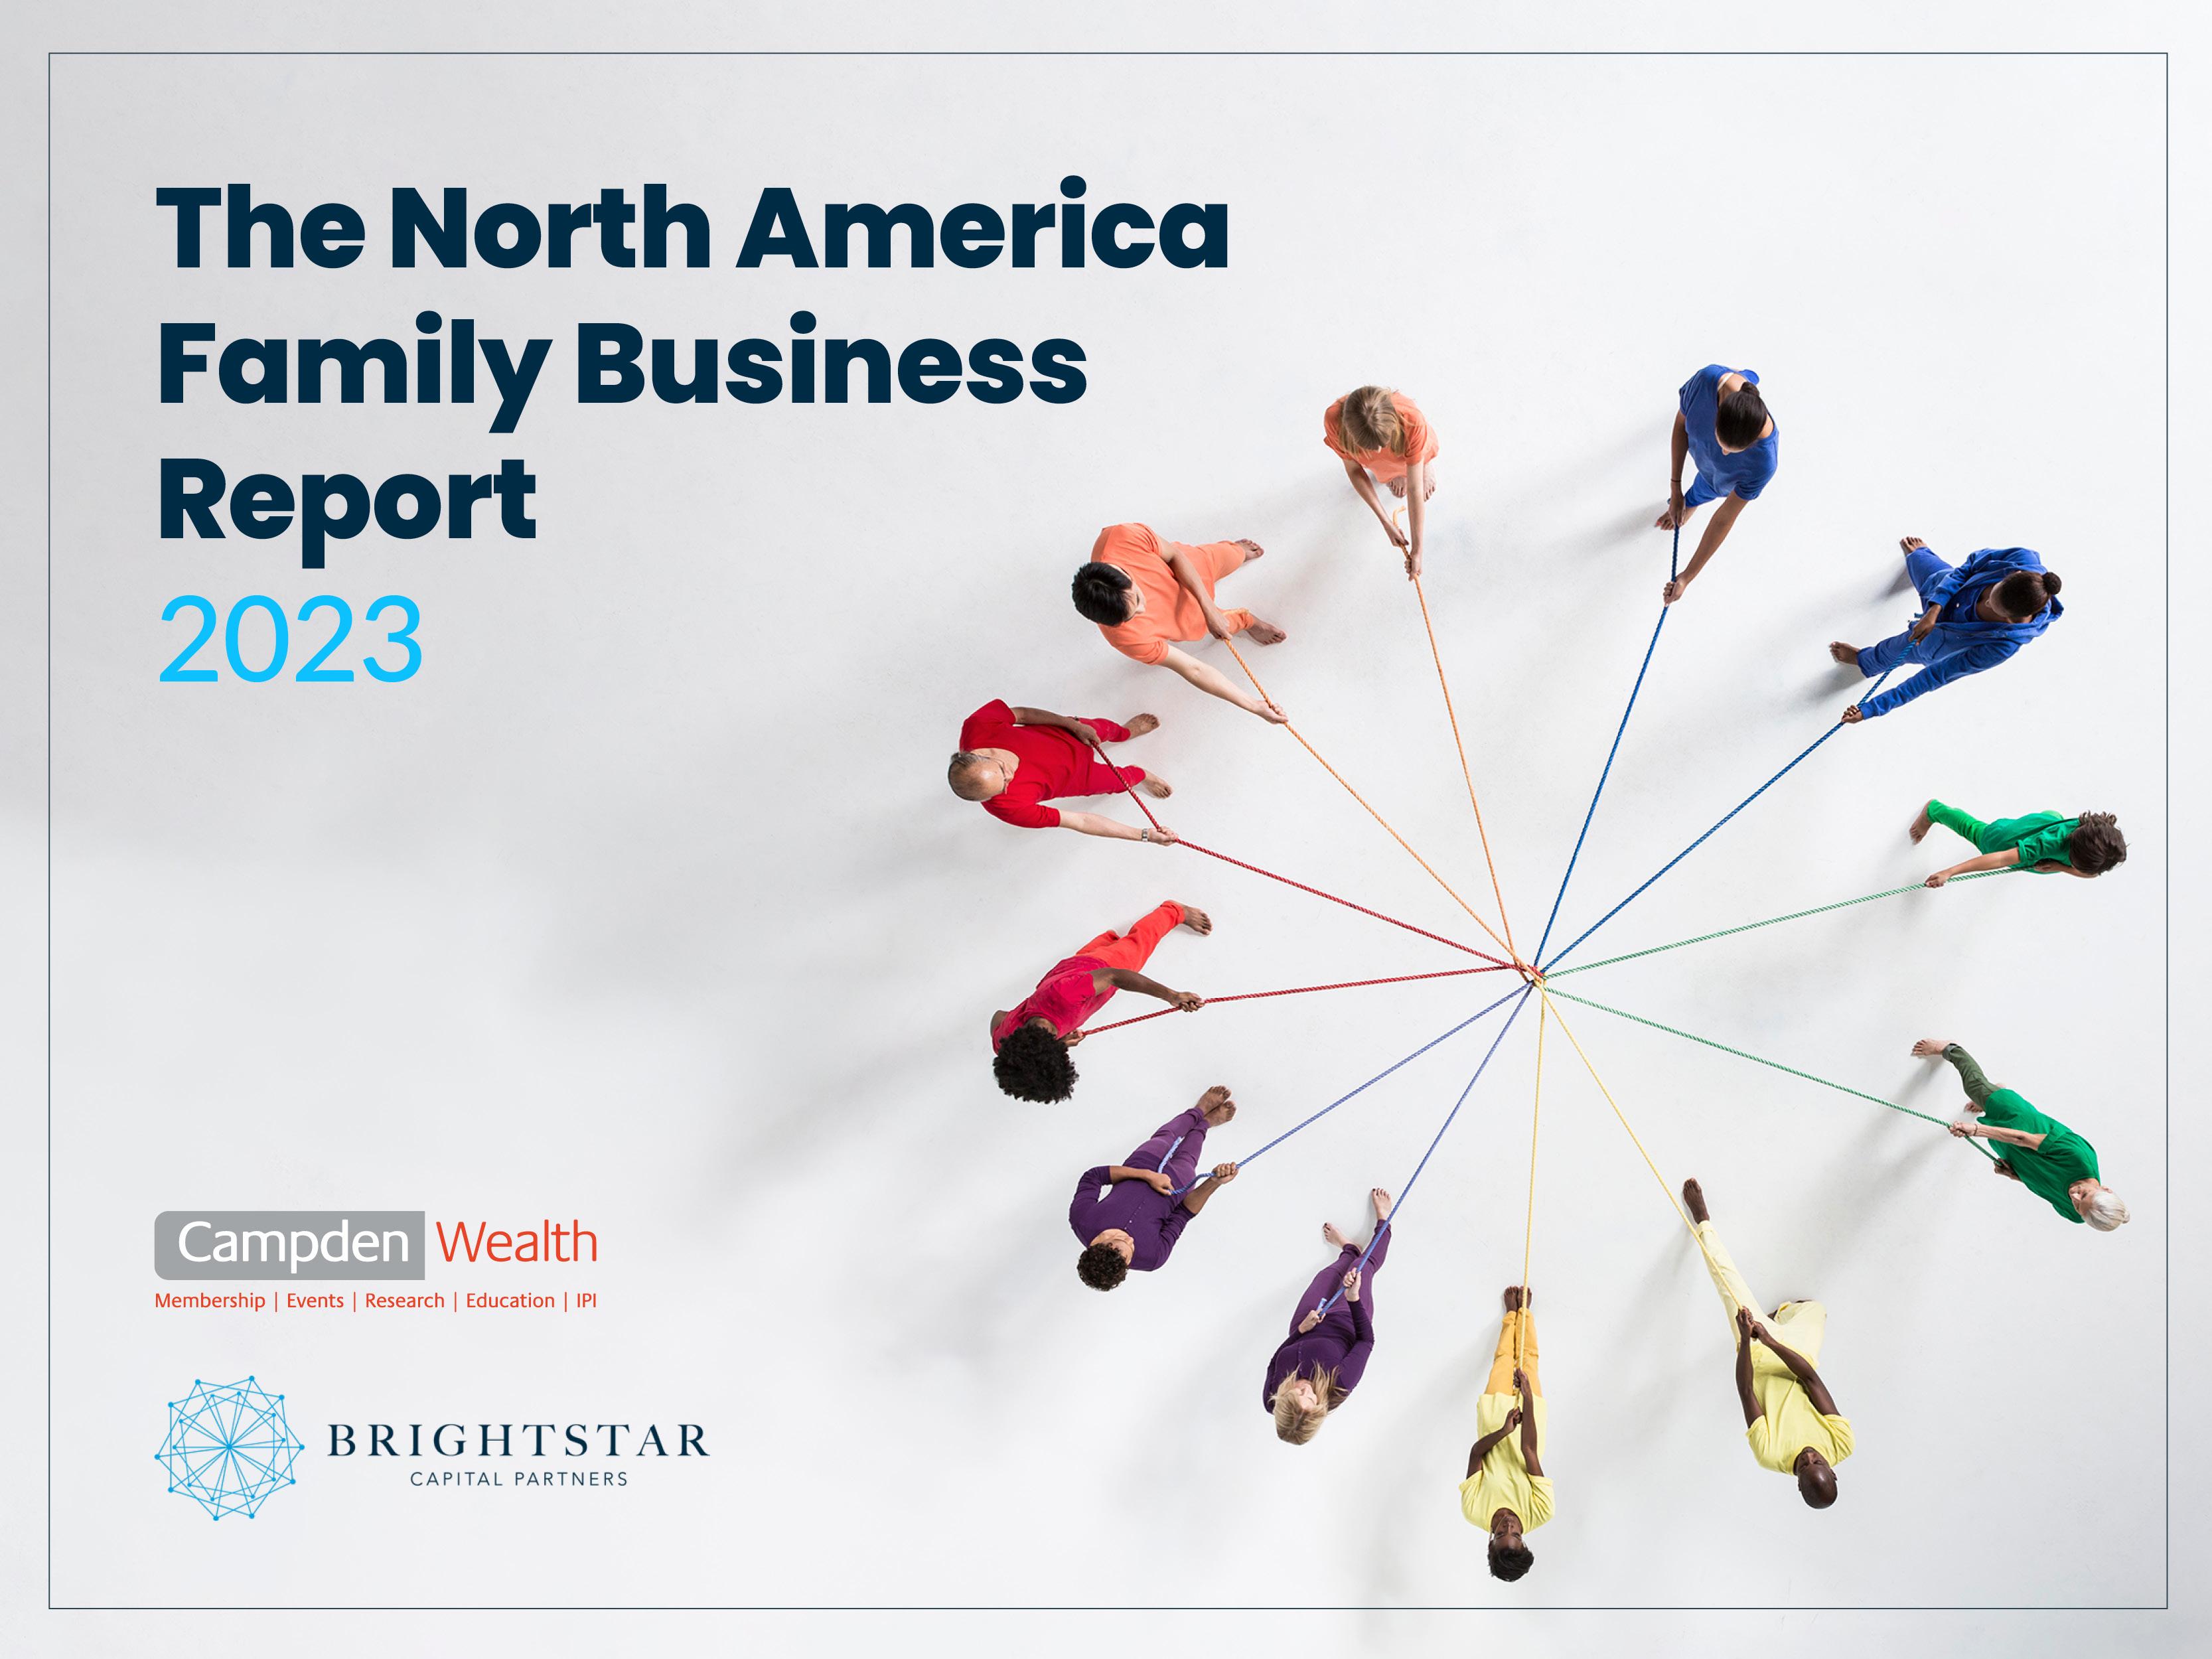 The North America Family Business Report 2023